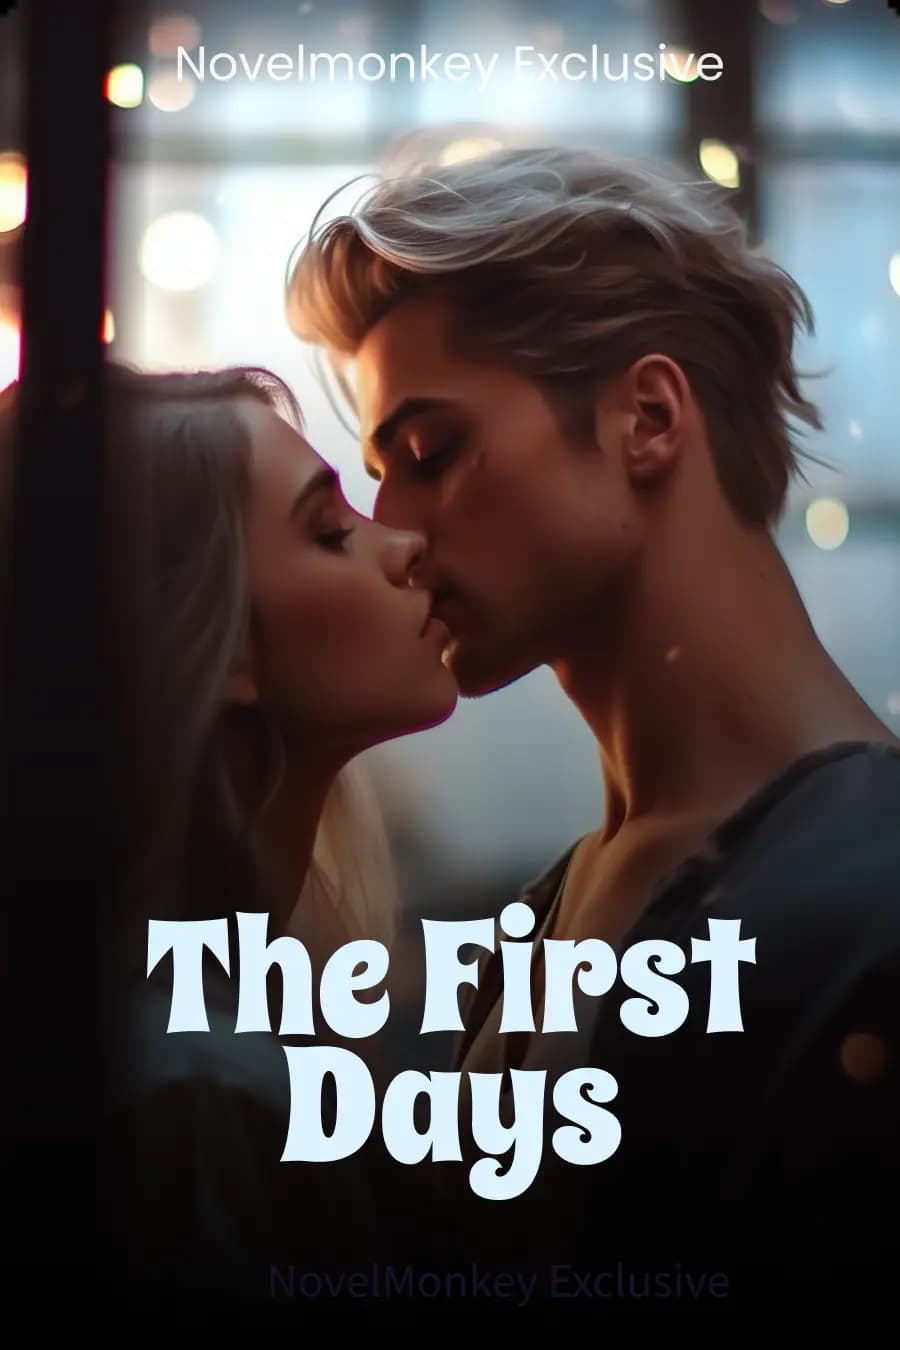 Book cover:The first days, the couple is kissing each other